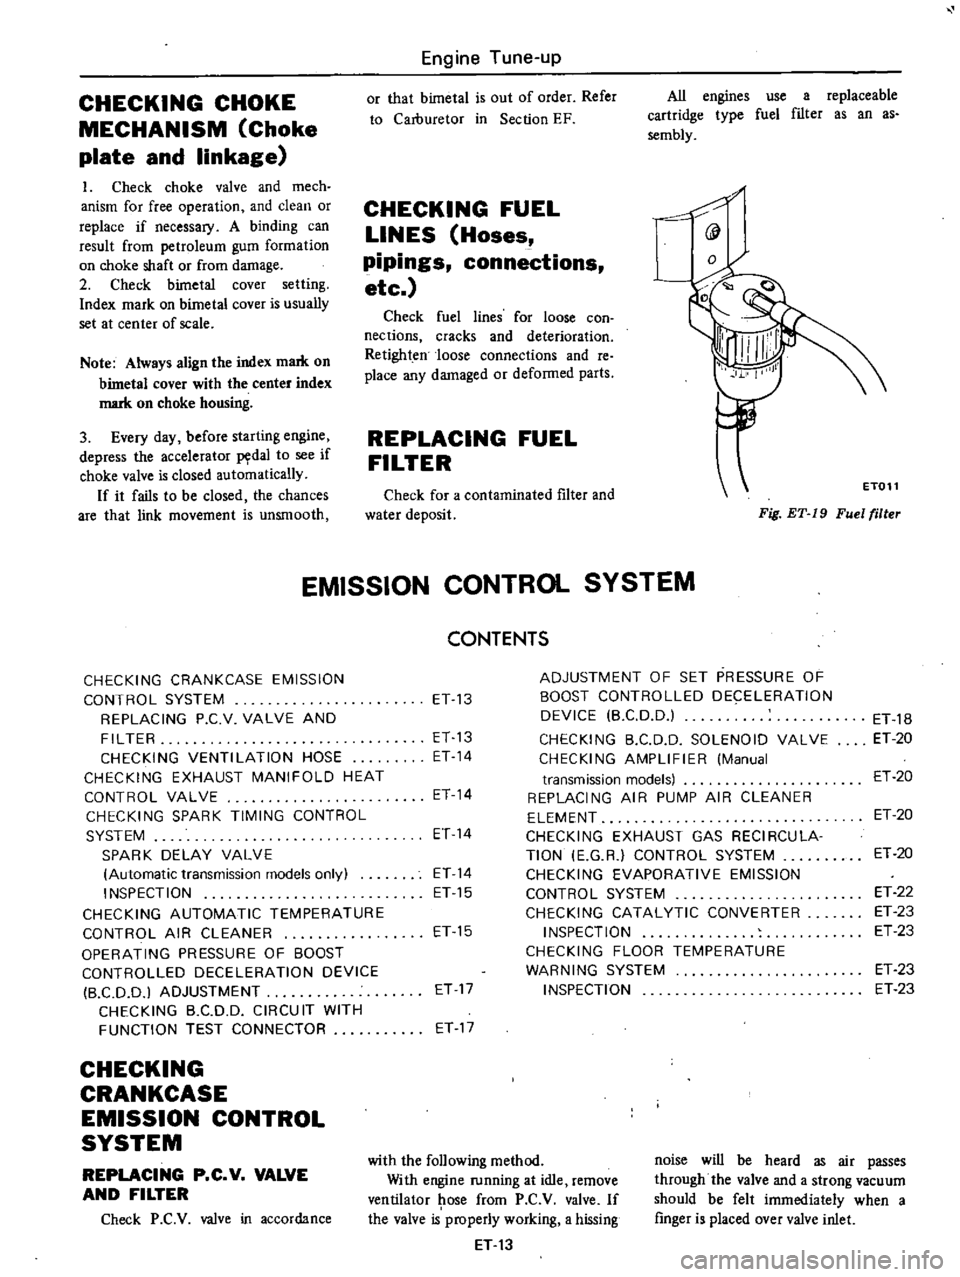 DATSUN PICK-UP 1977  Service Manual 
CHECKING 
CHOKE

MECHANISM 
Choke

plate 
and

linkage

1 
Check 
choke

valve 
and 
mech

anism

for 
free

operation 
and 
clean 
or

replace 
if

necessary 
A 
binding 
can

result 
from

petroleu